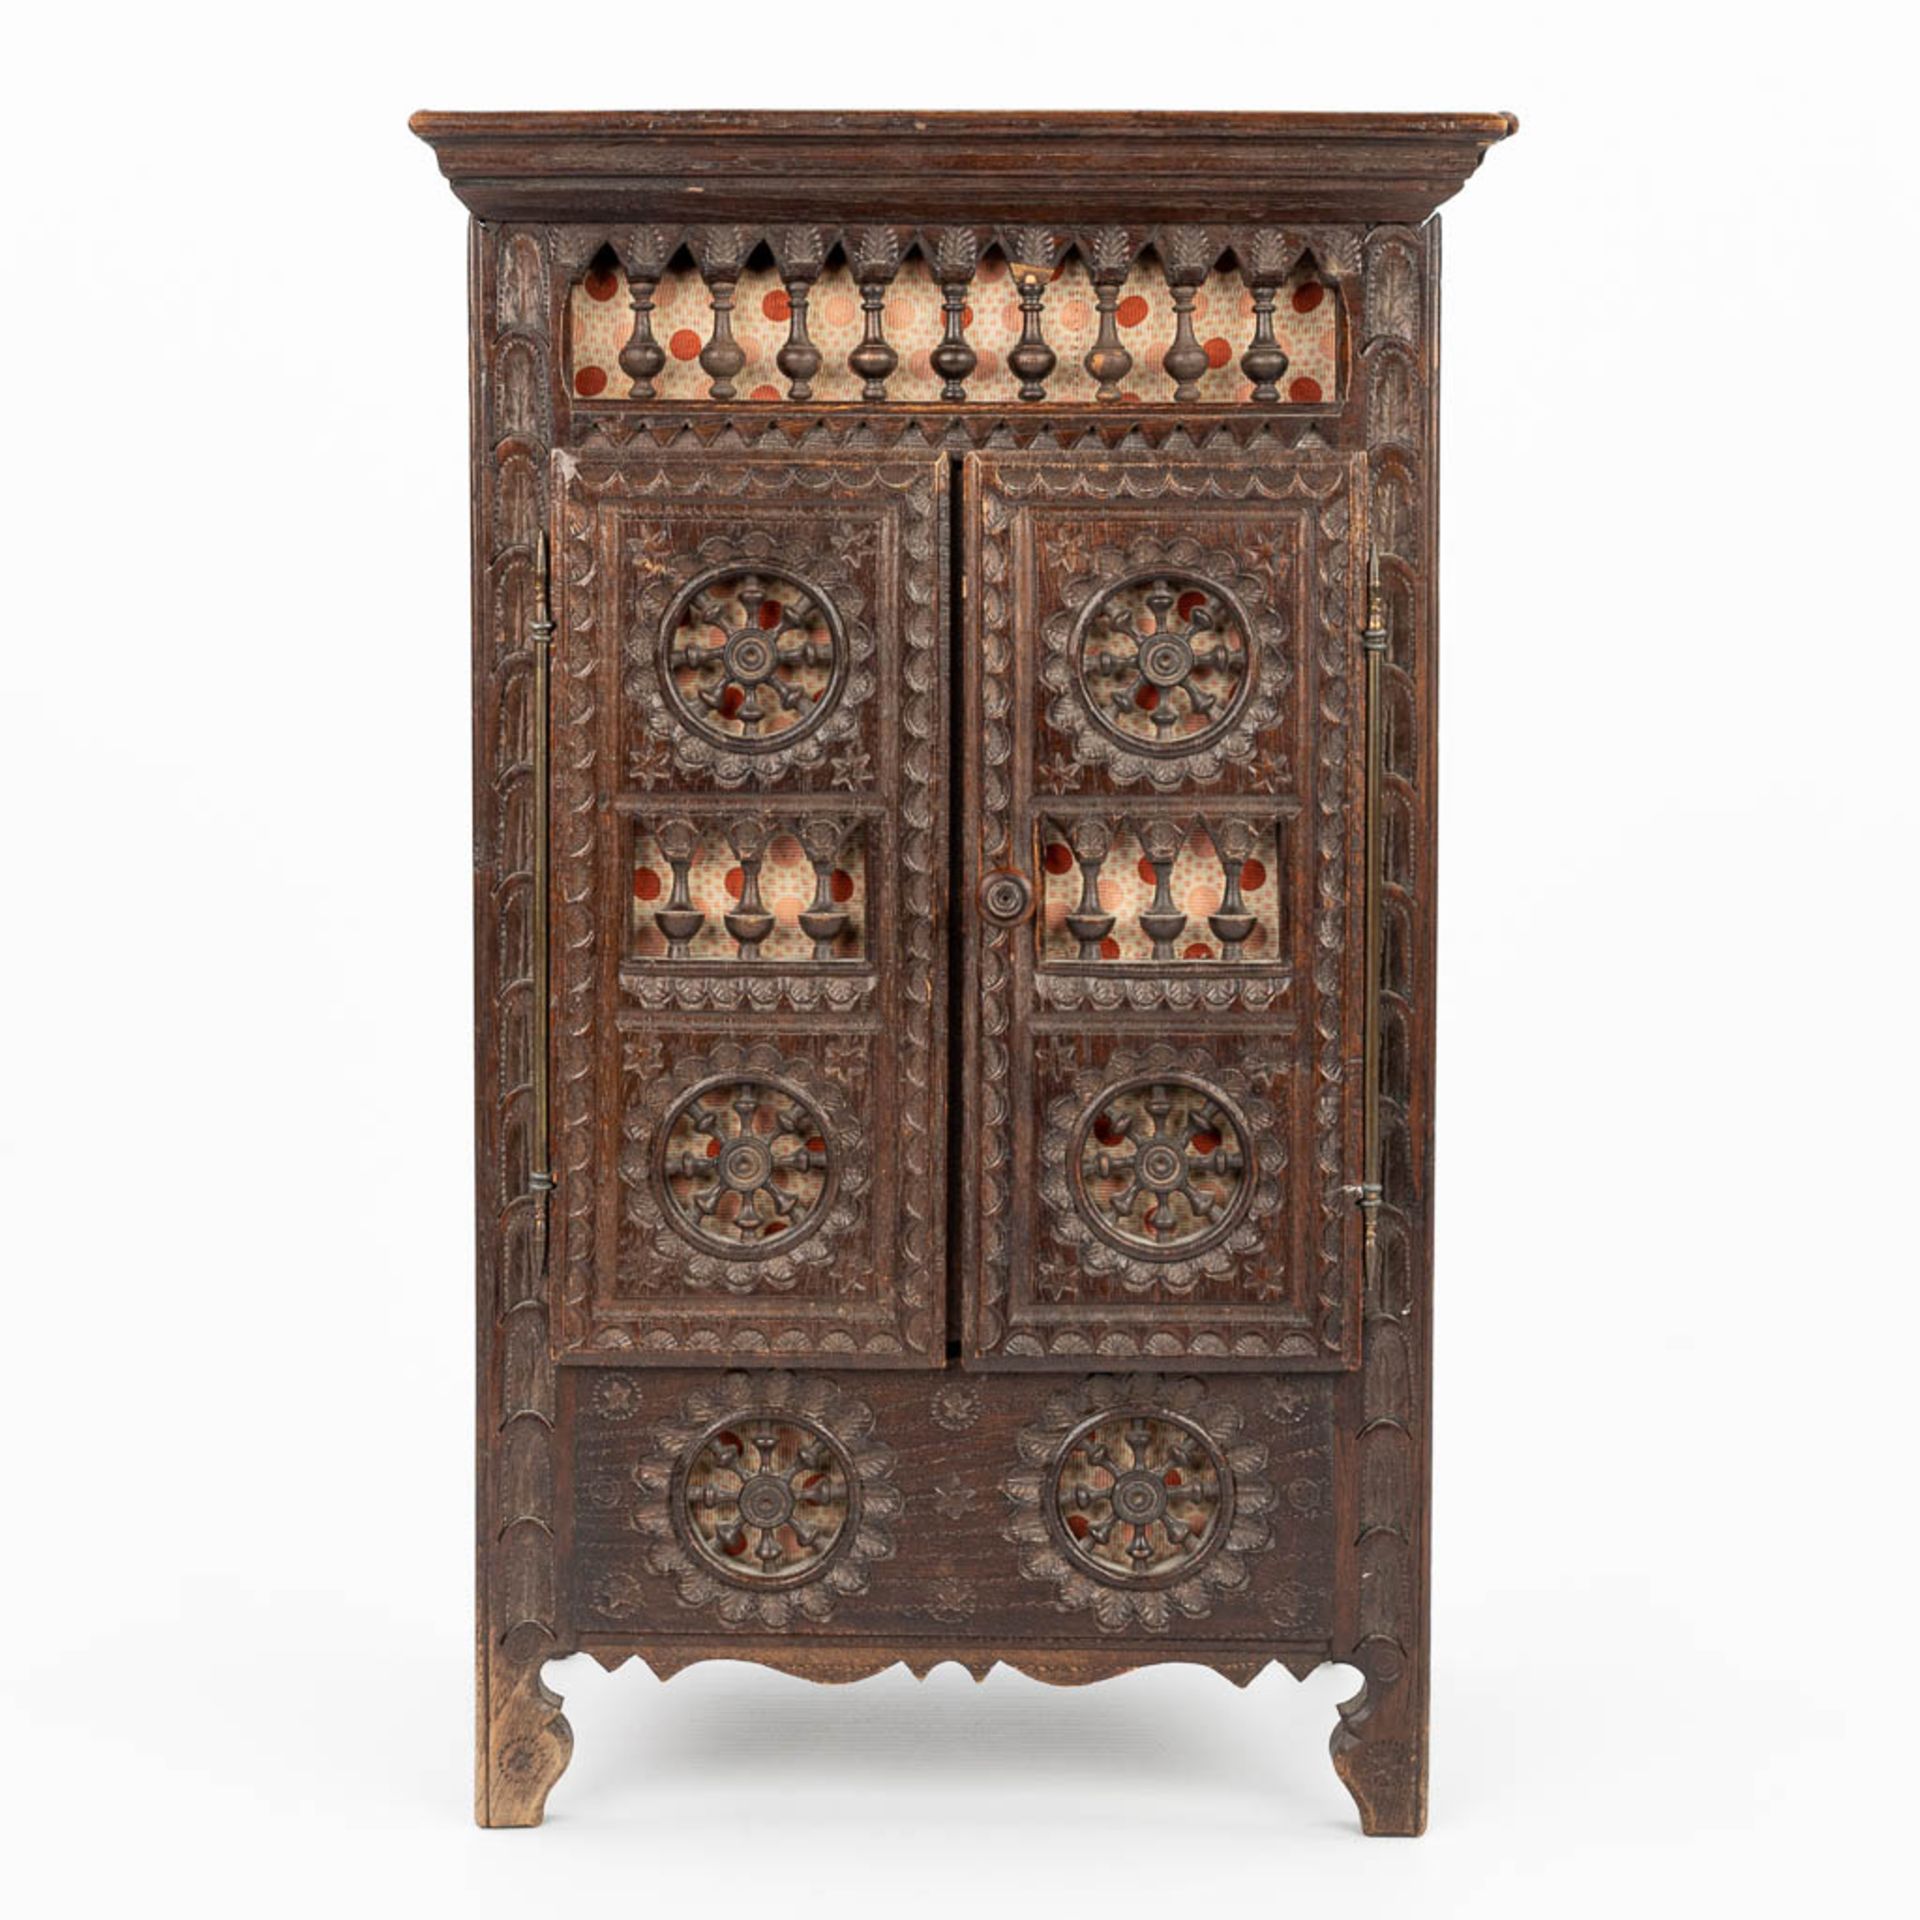 A miniature Breton cabinet, made of sculptured wood. (H:37cm) - Image 5 of 14